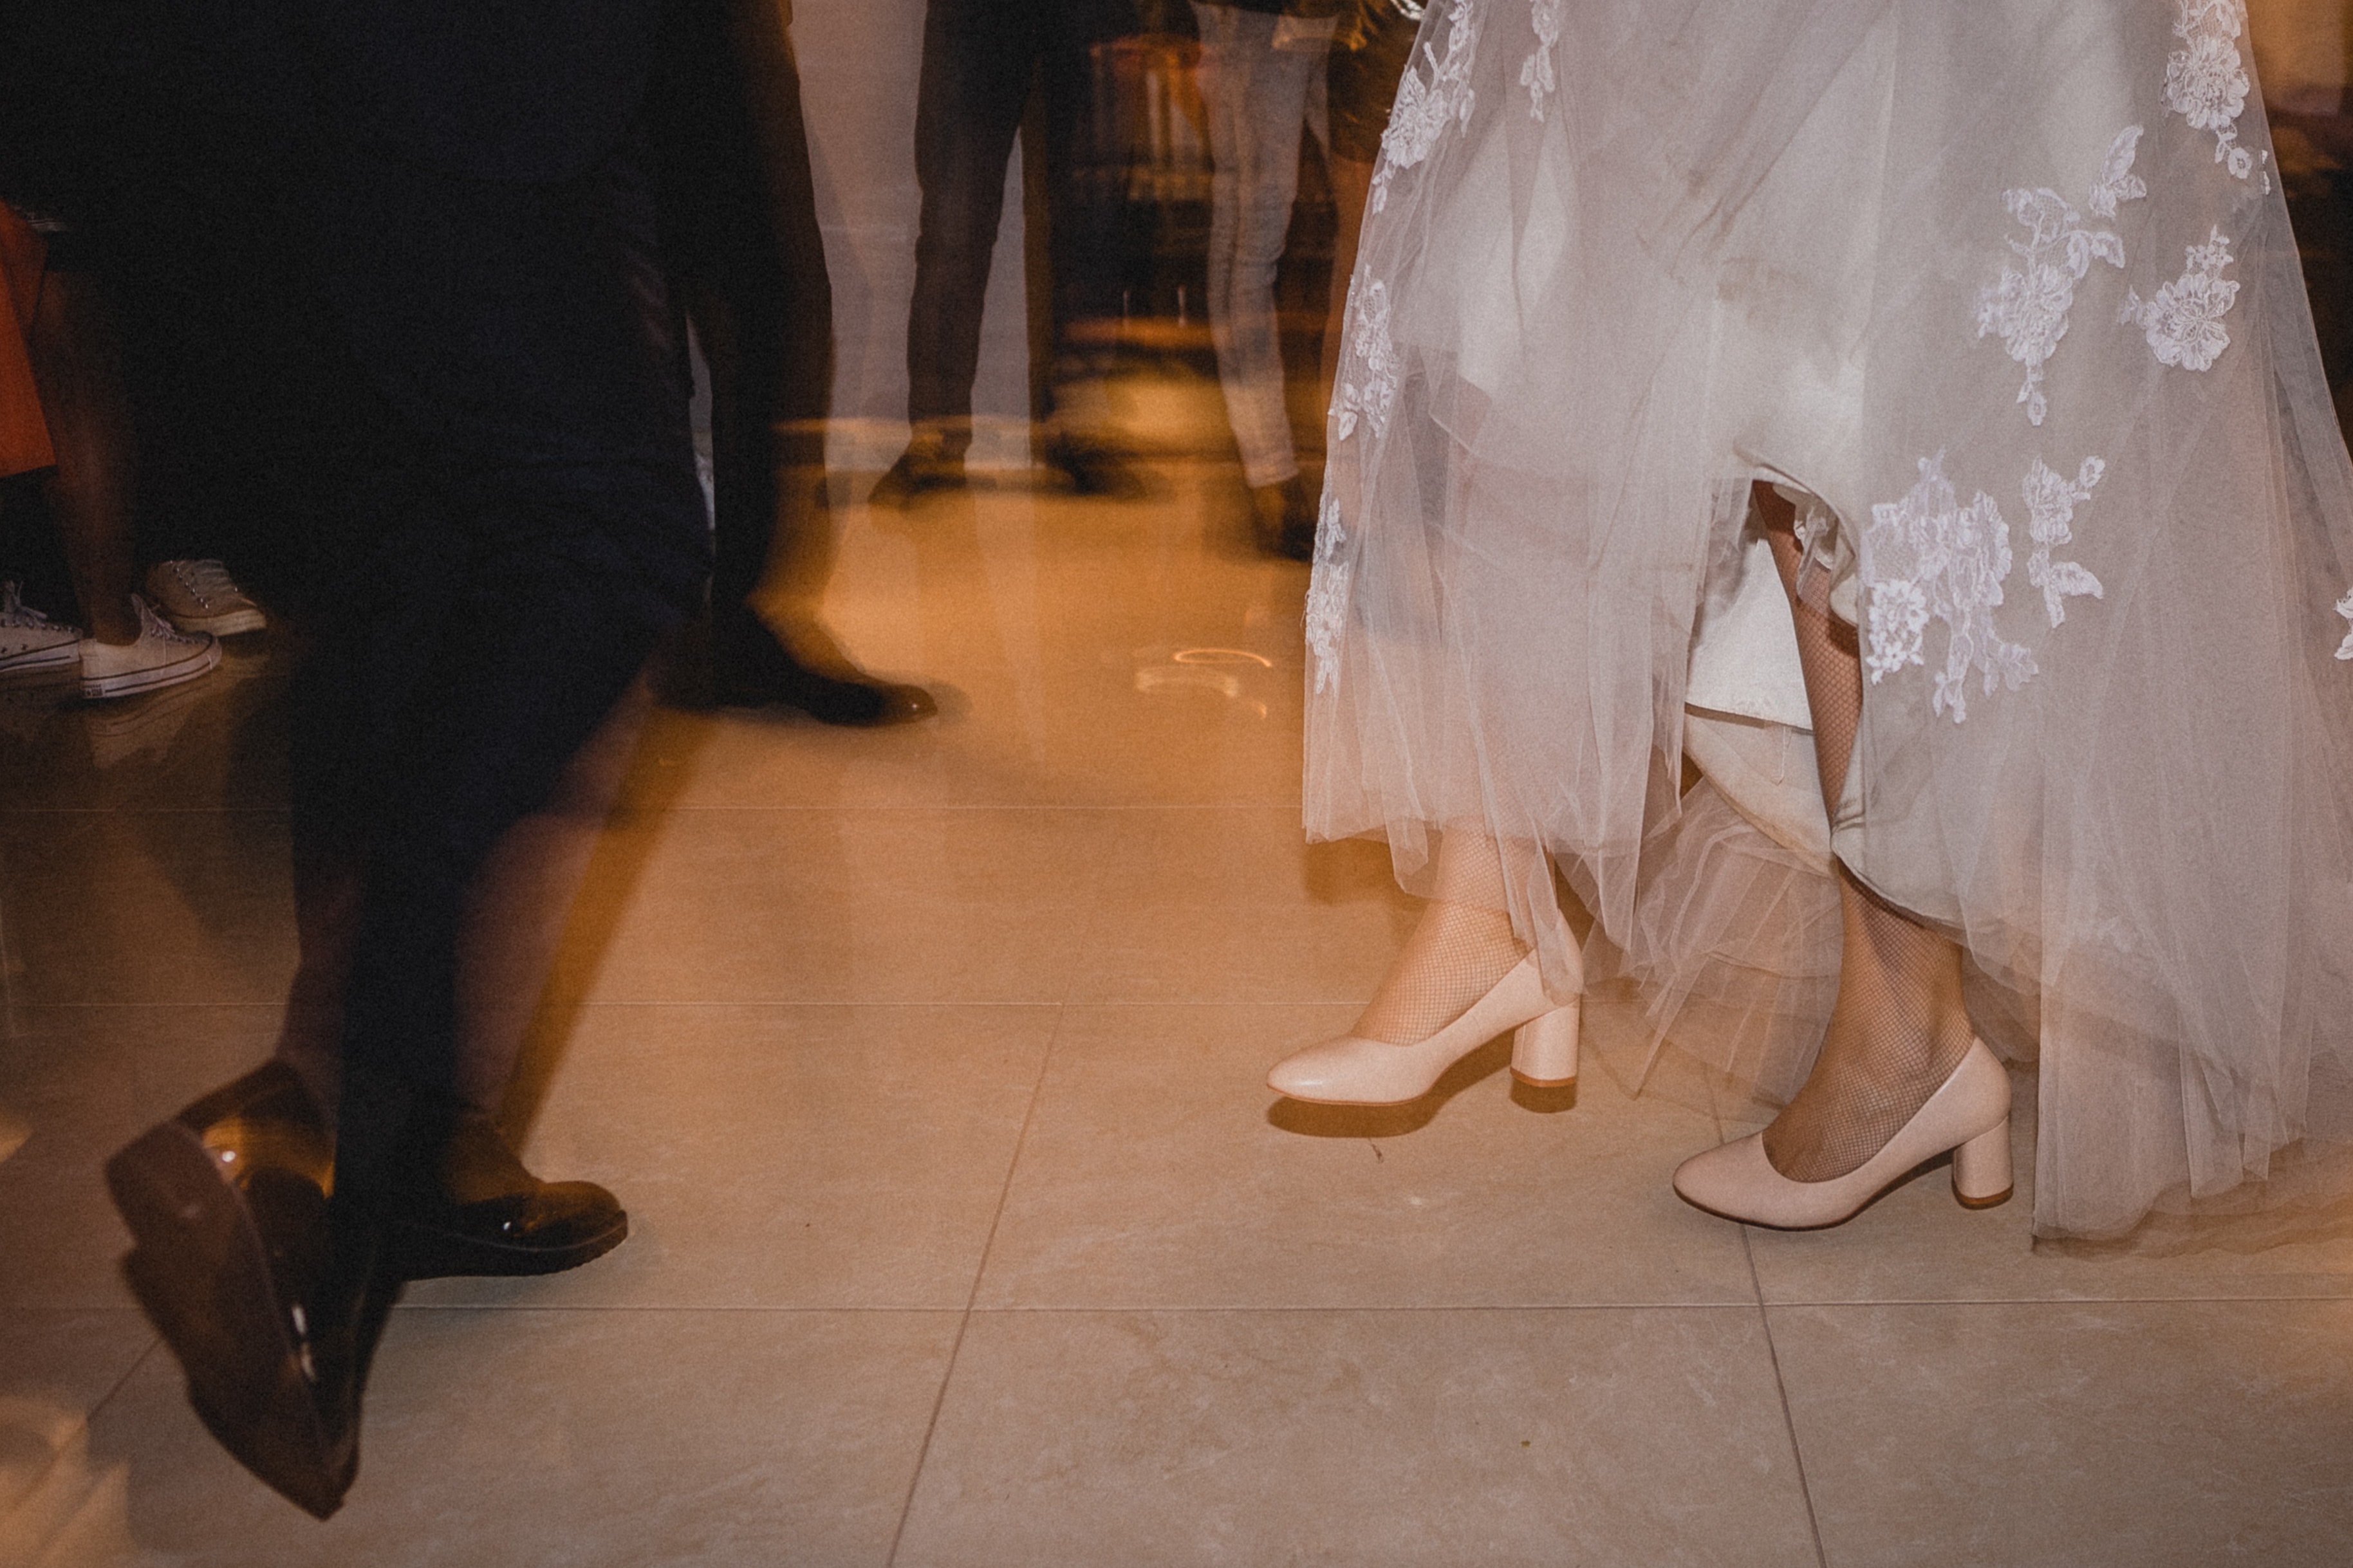 A bride and groom dancing together. | Source: Pexels